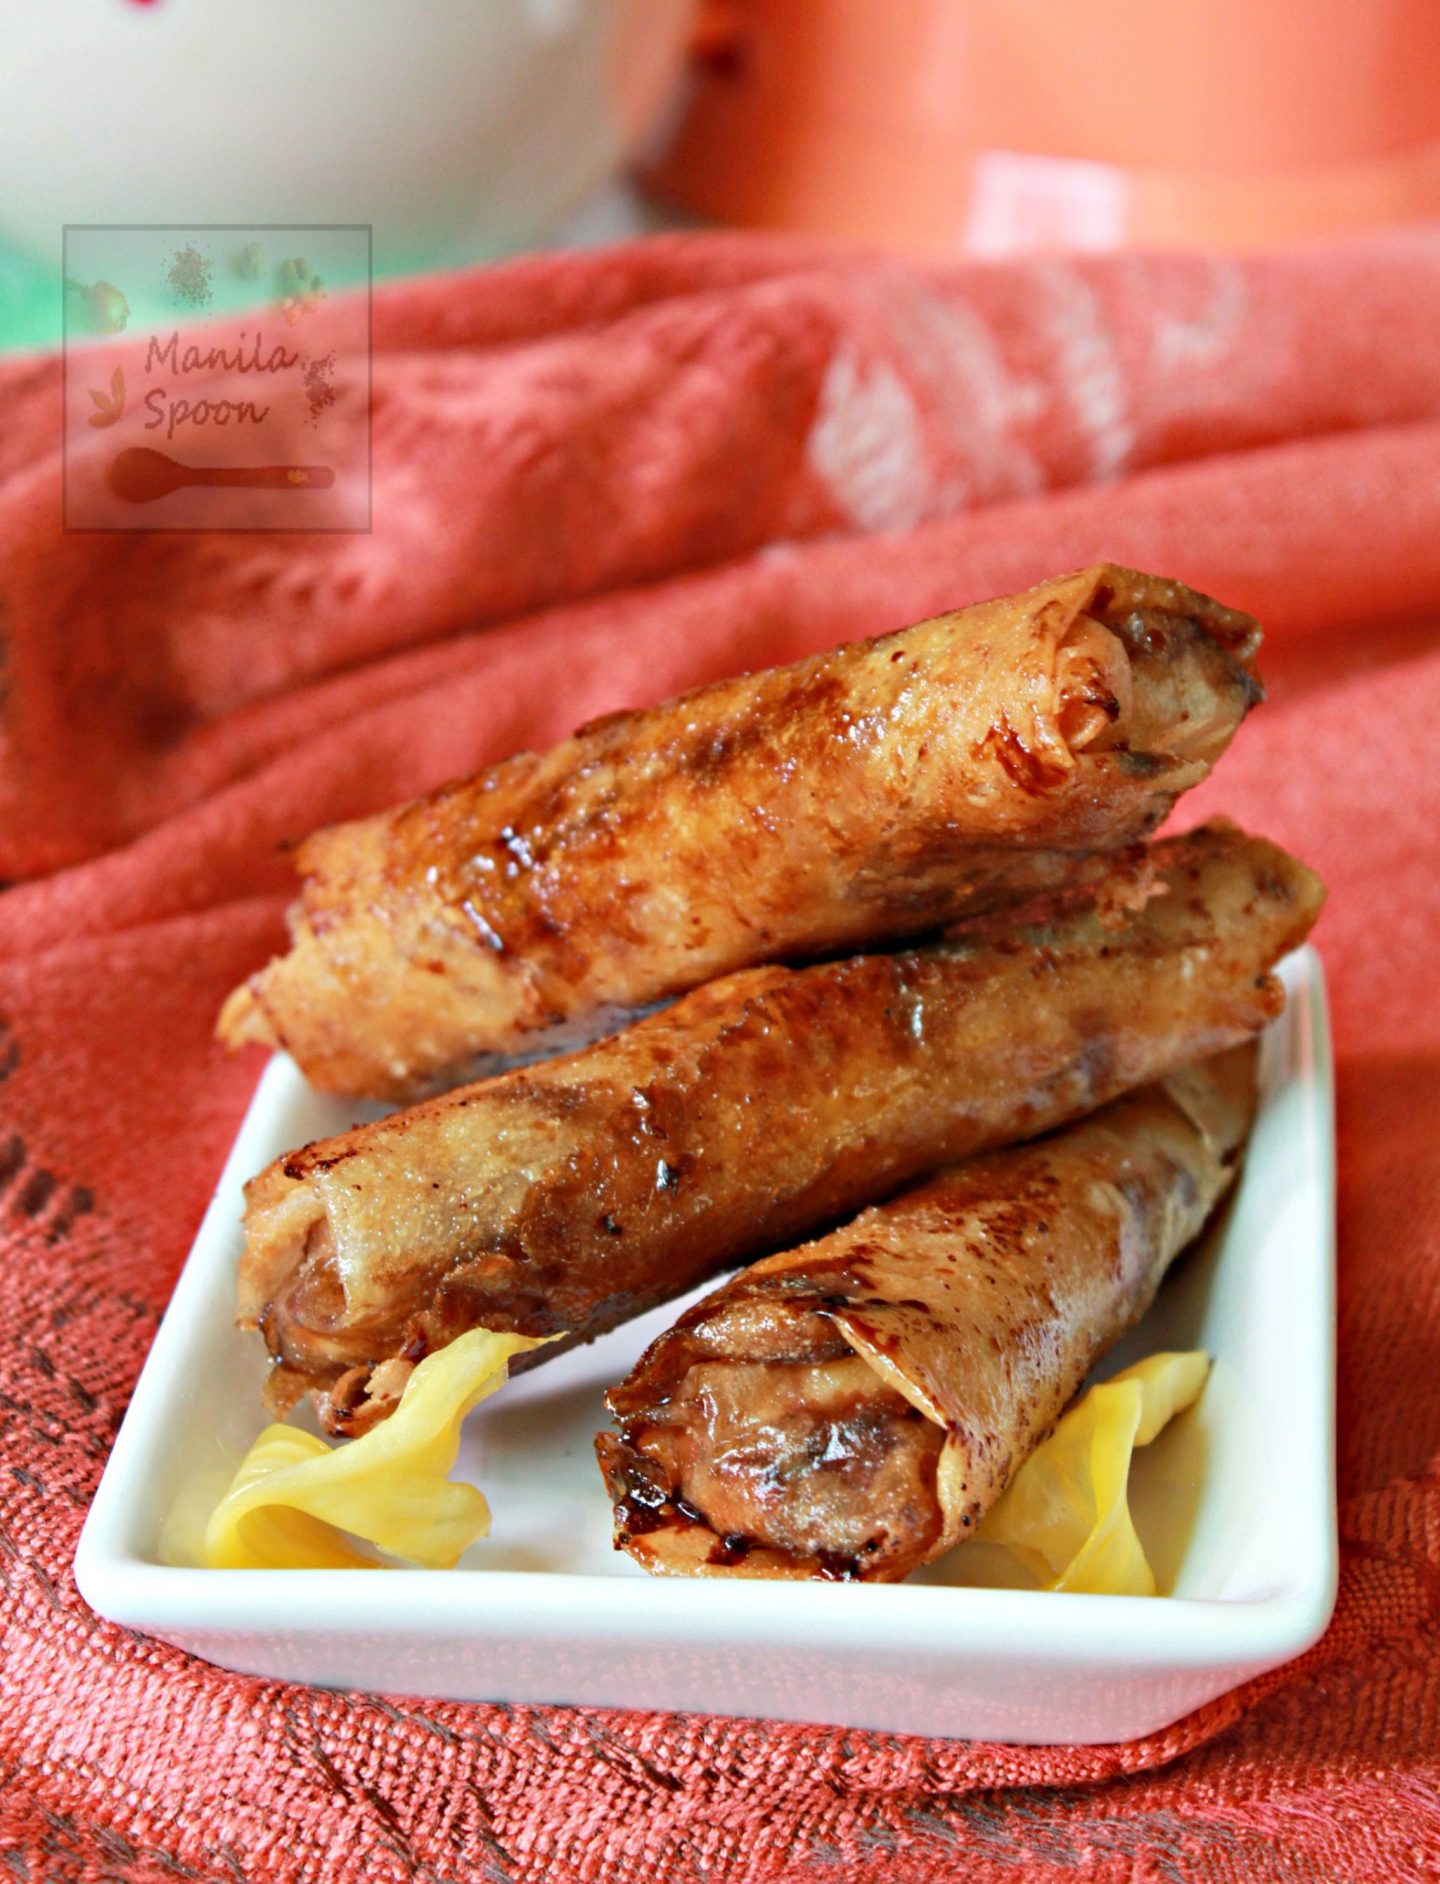 These Banana Spring Rolls or Lumpia - Turon - are the best way to use up all that ripe Bananas. Bananas are rolled in sugar and then wrap in spring roll wrappers with slices of jackfruit then cooked until perfectly crispy. This delicious caramelized Asian classic snack or dessert is a must-make. #turon #bananalumpia #bananaspringrolls #lumpia